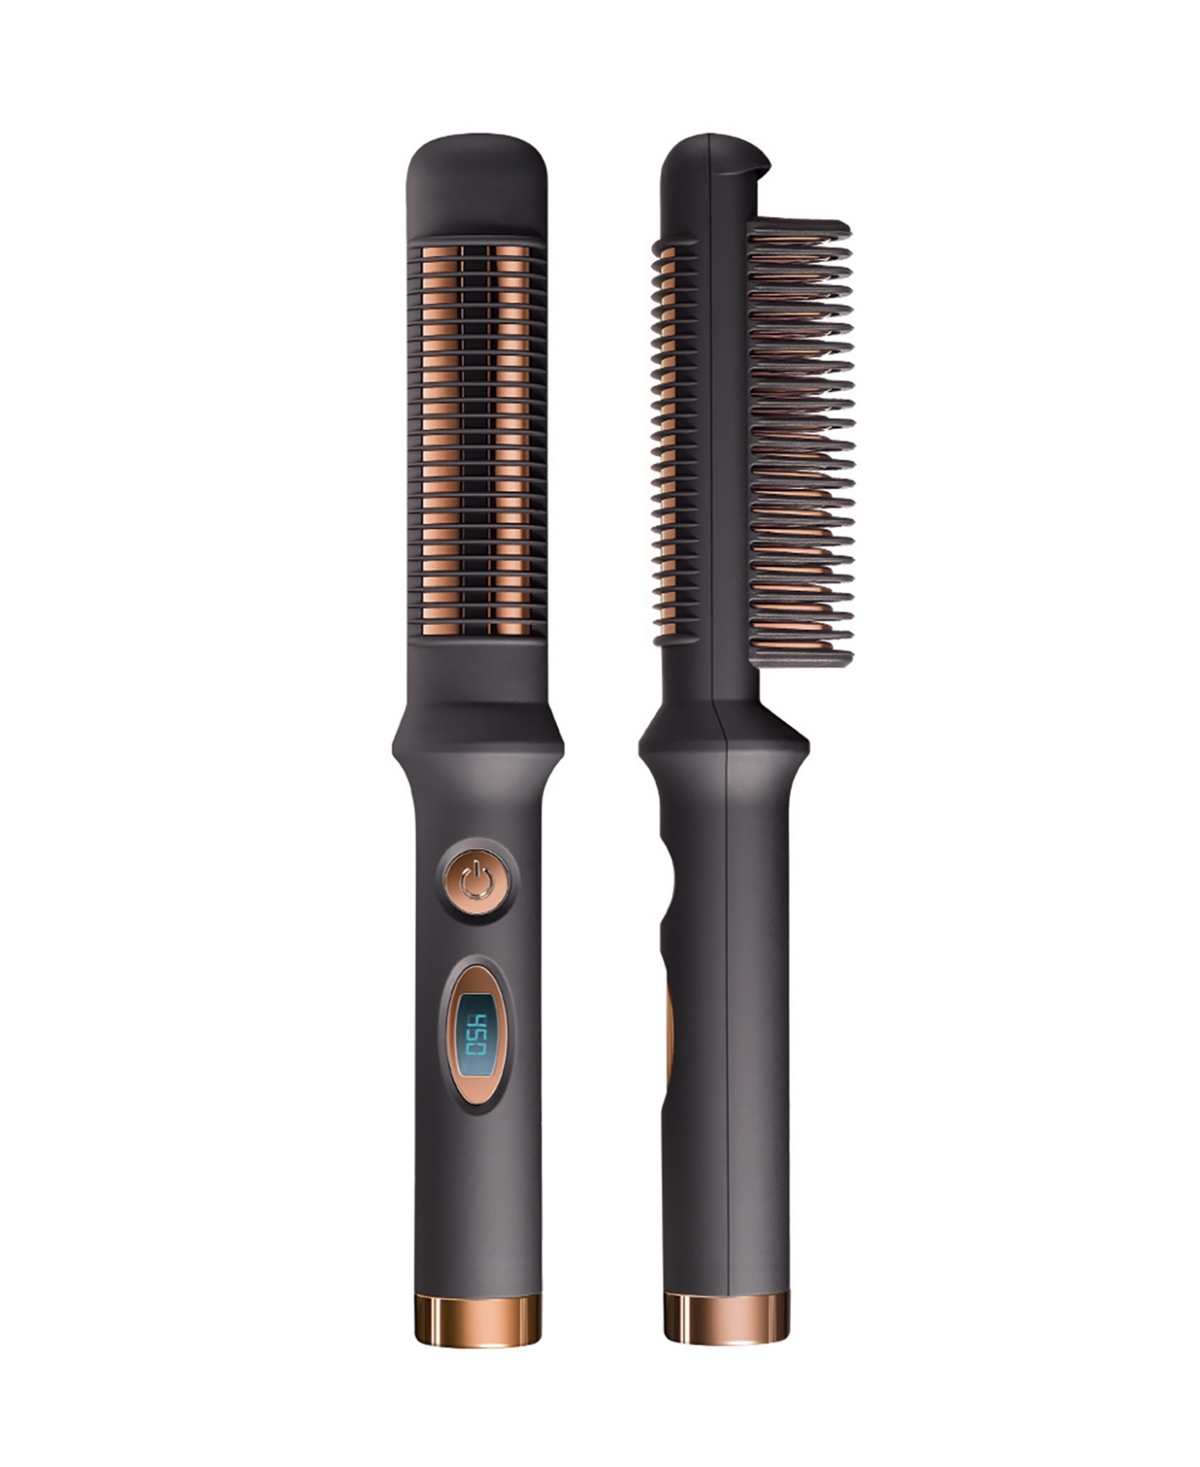 Glider Pro Styling Comb with Dual Titanium Plates